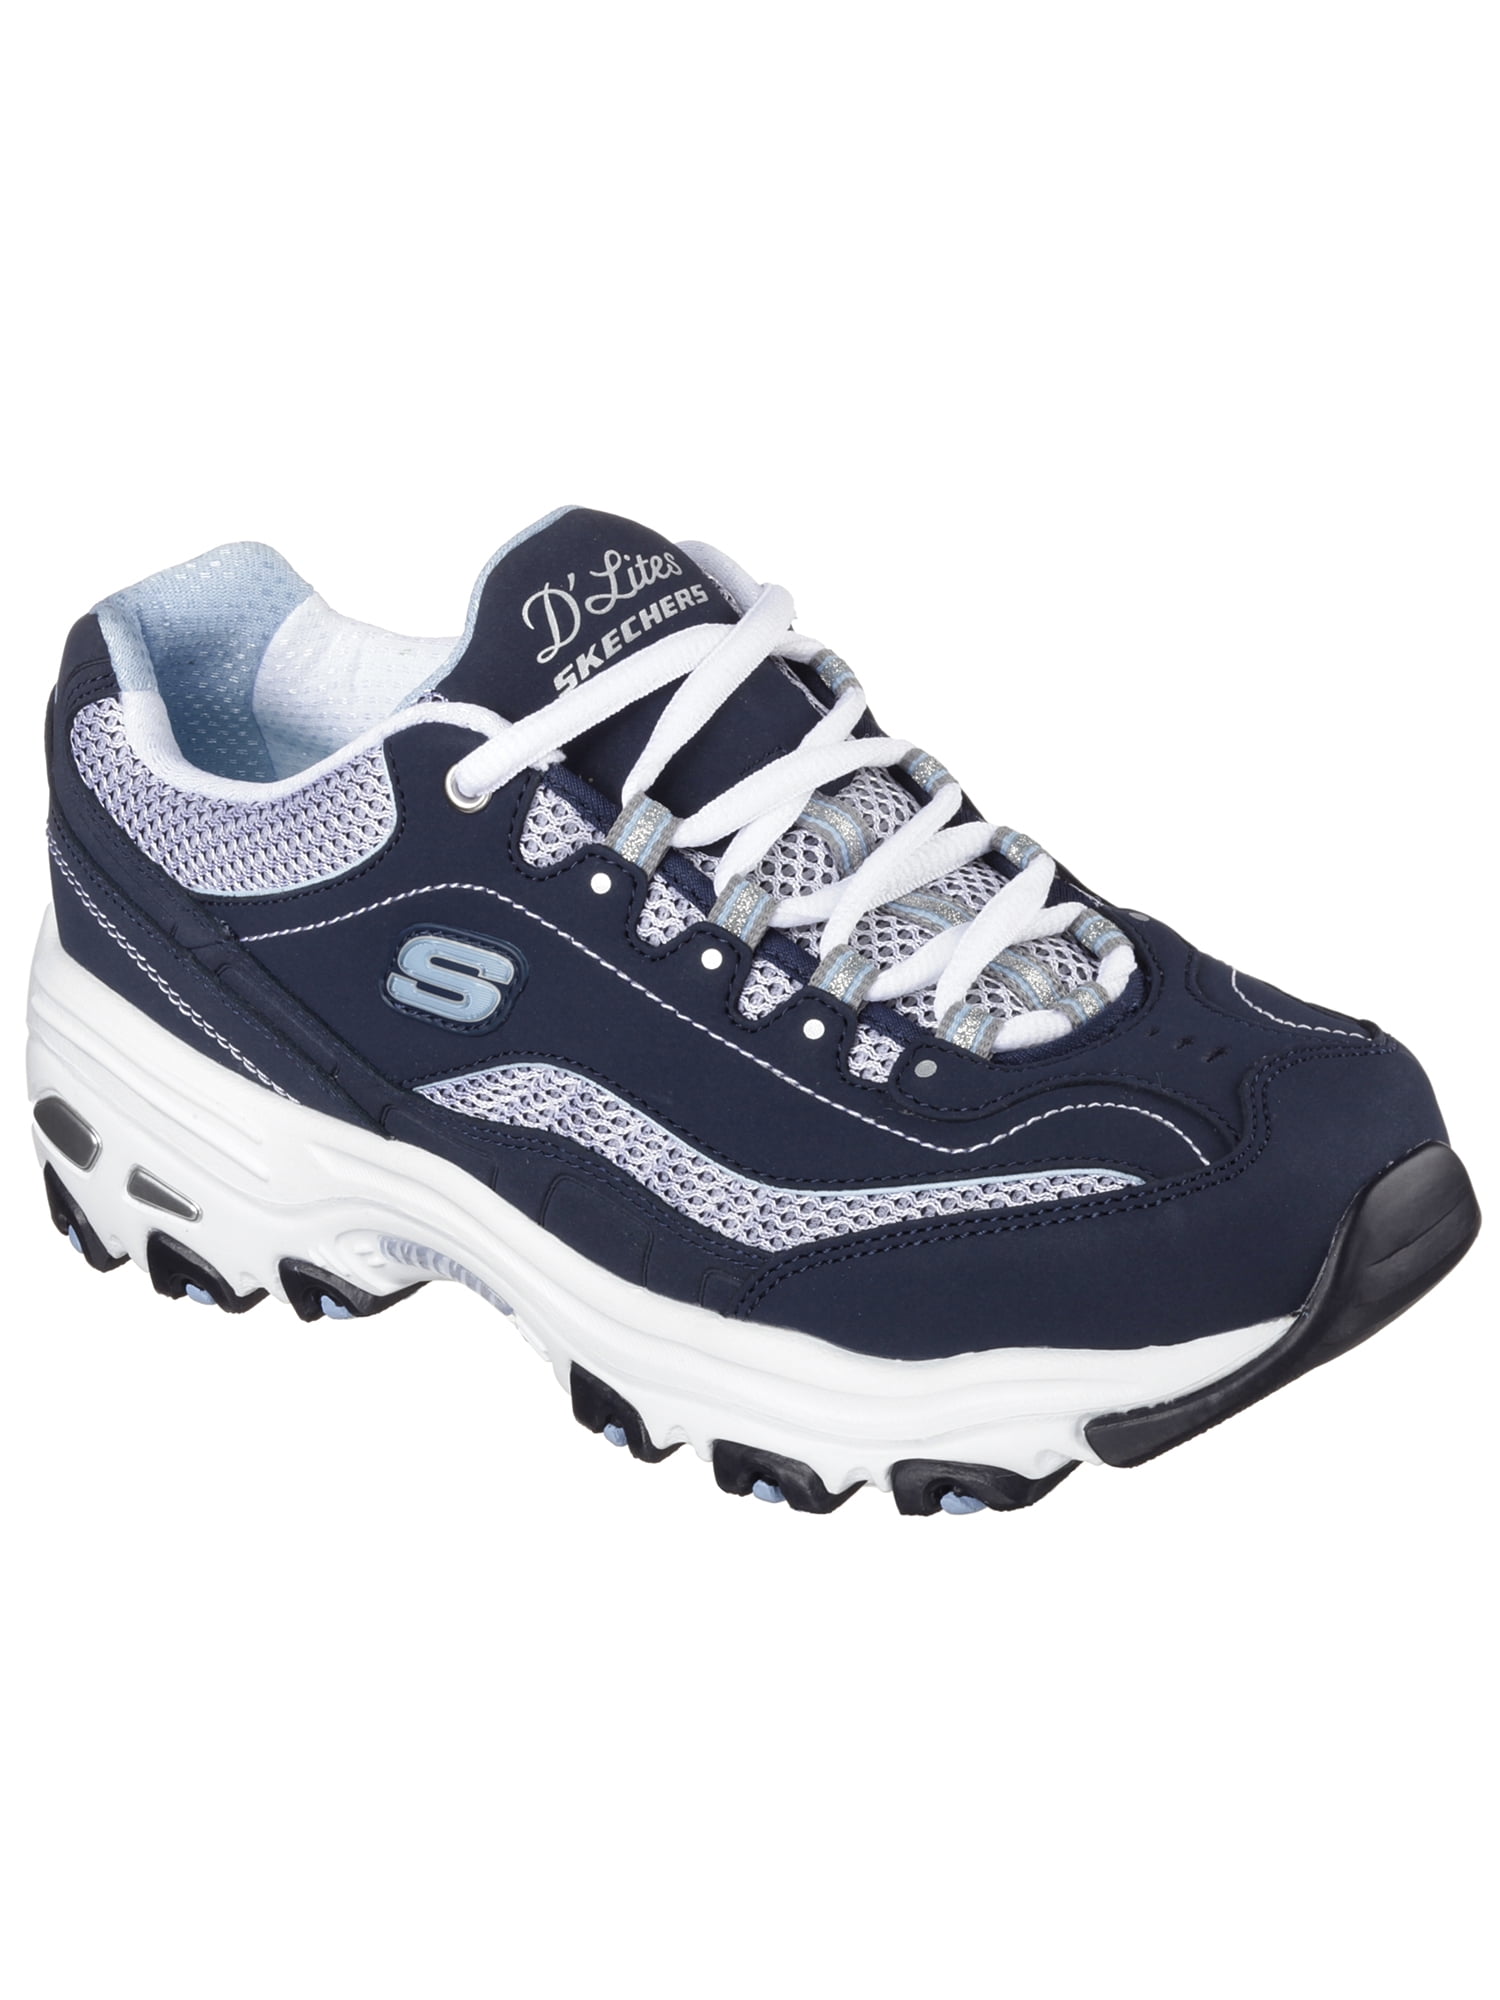 Skechers Women's Sport D'Lites Life Saver Lace-up Athletic Sneaker, Wide  Width Available 